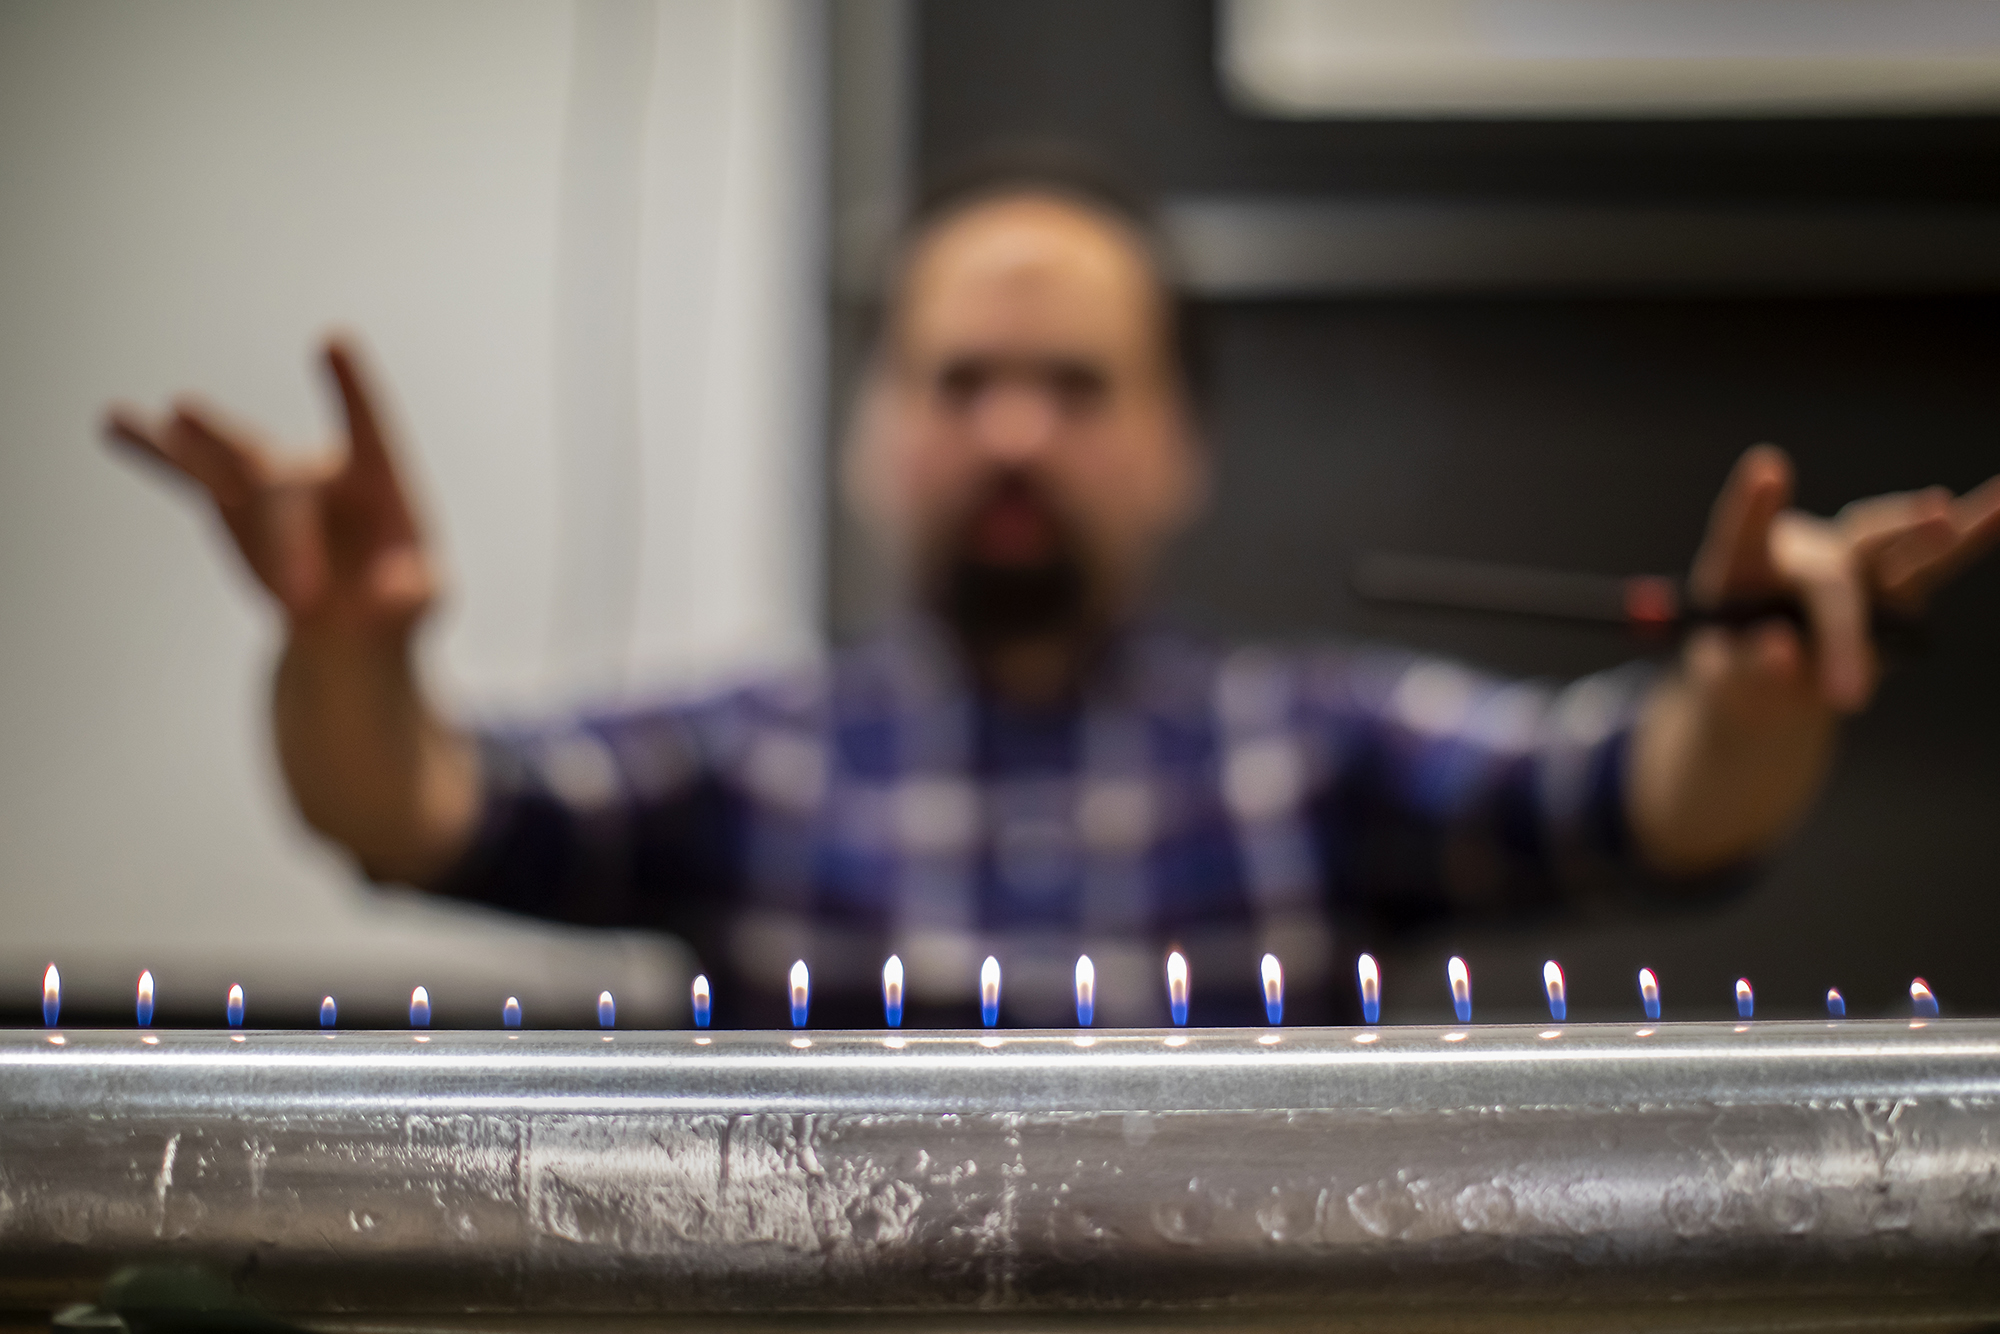 a metal tube with a line of flames coming out of the top and a blurred person posing in the background